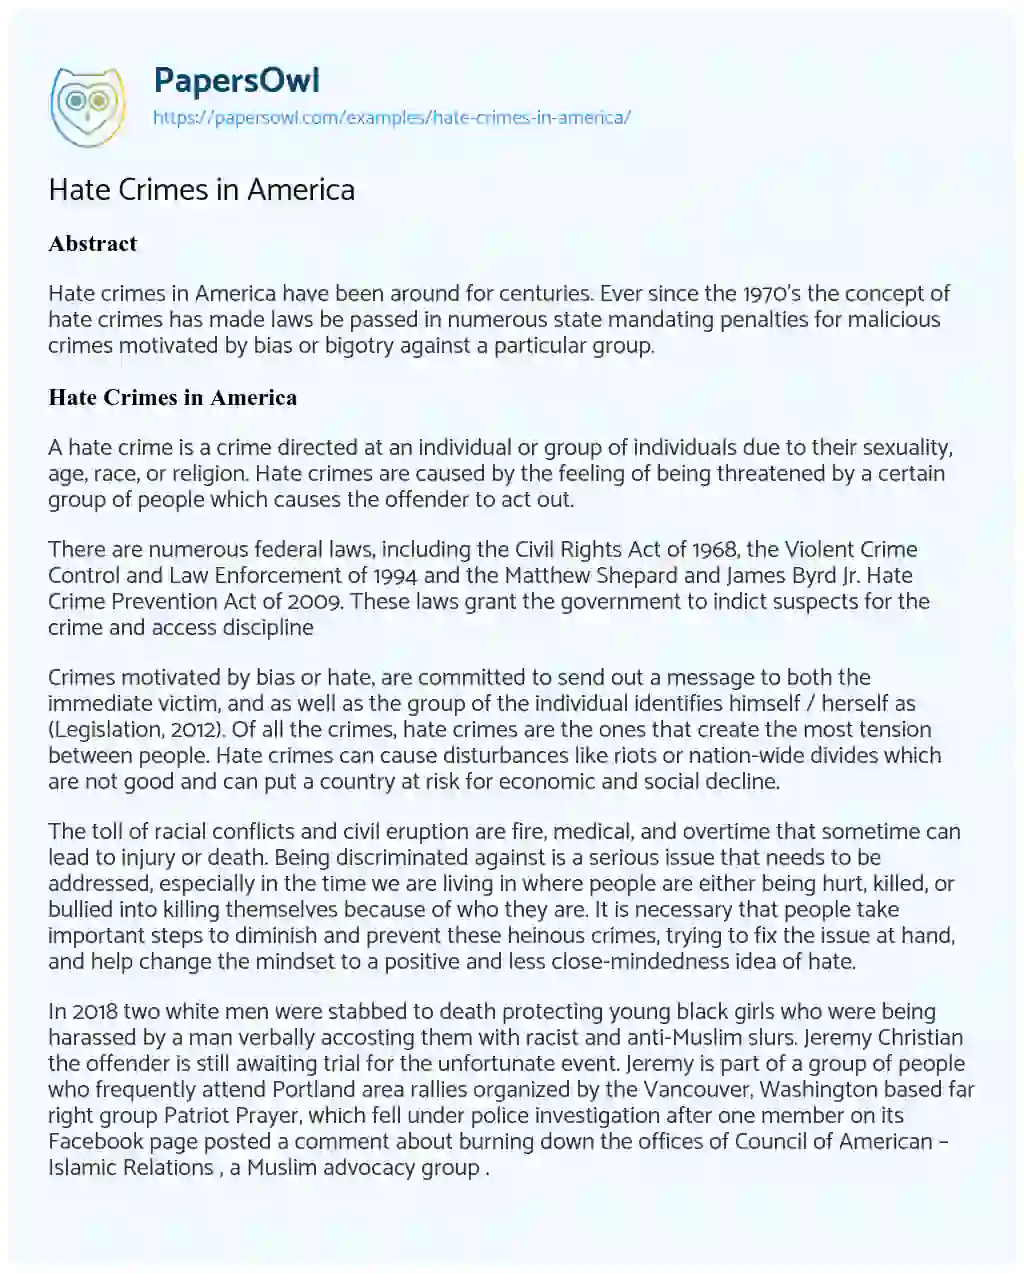 Essay on Hate Crimes in America